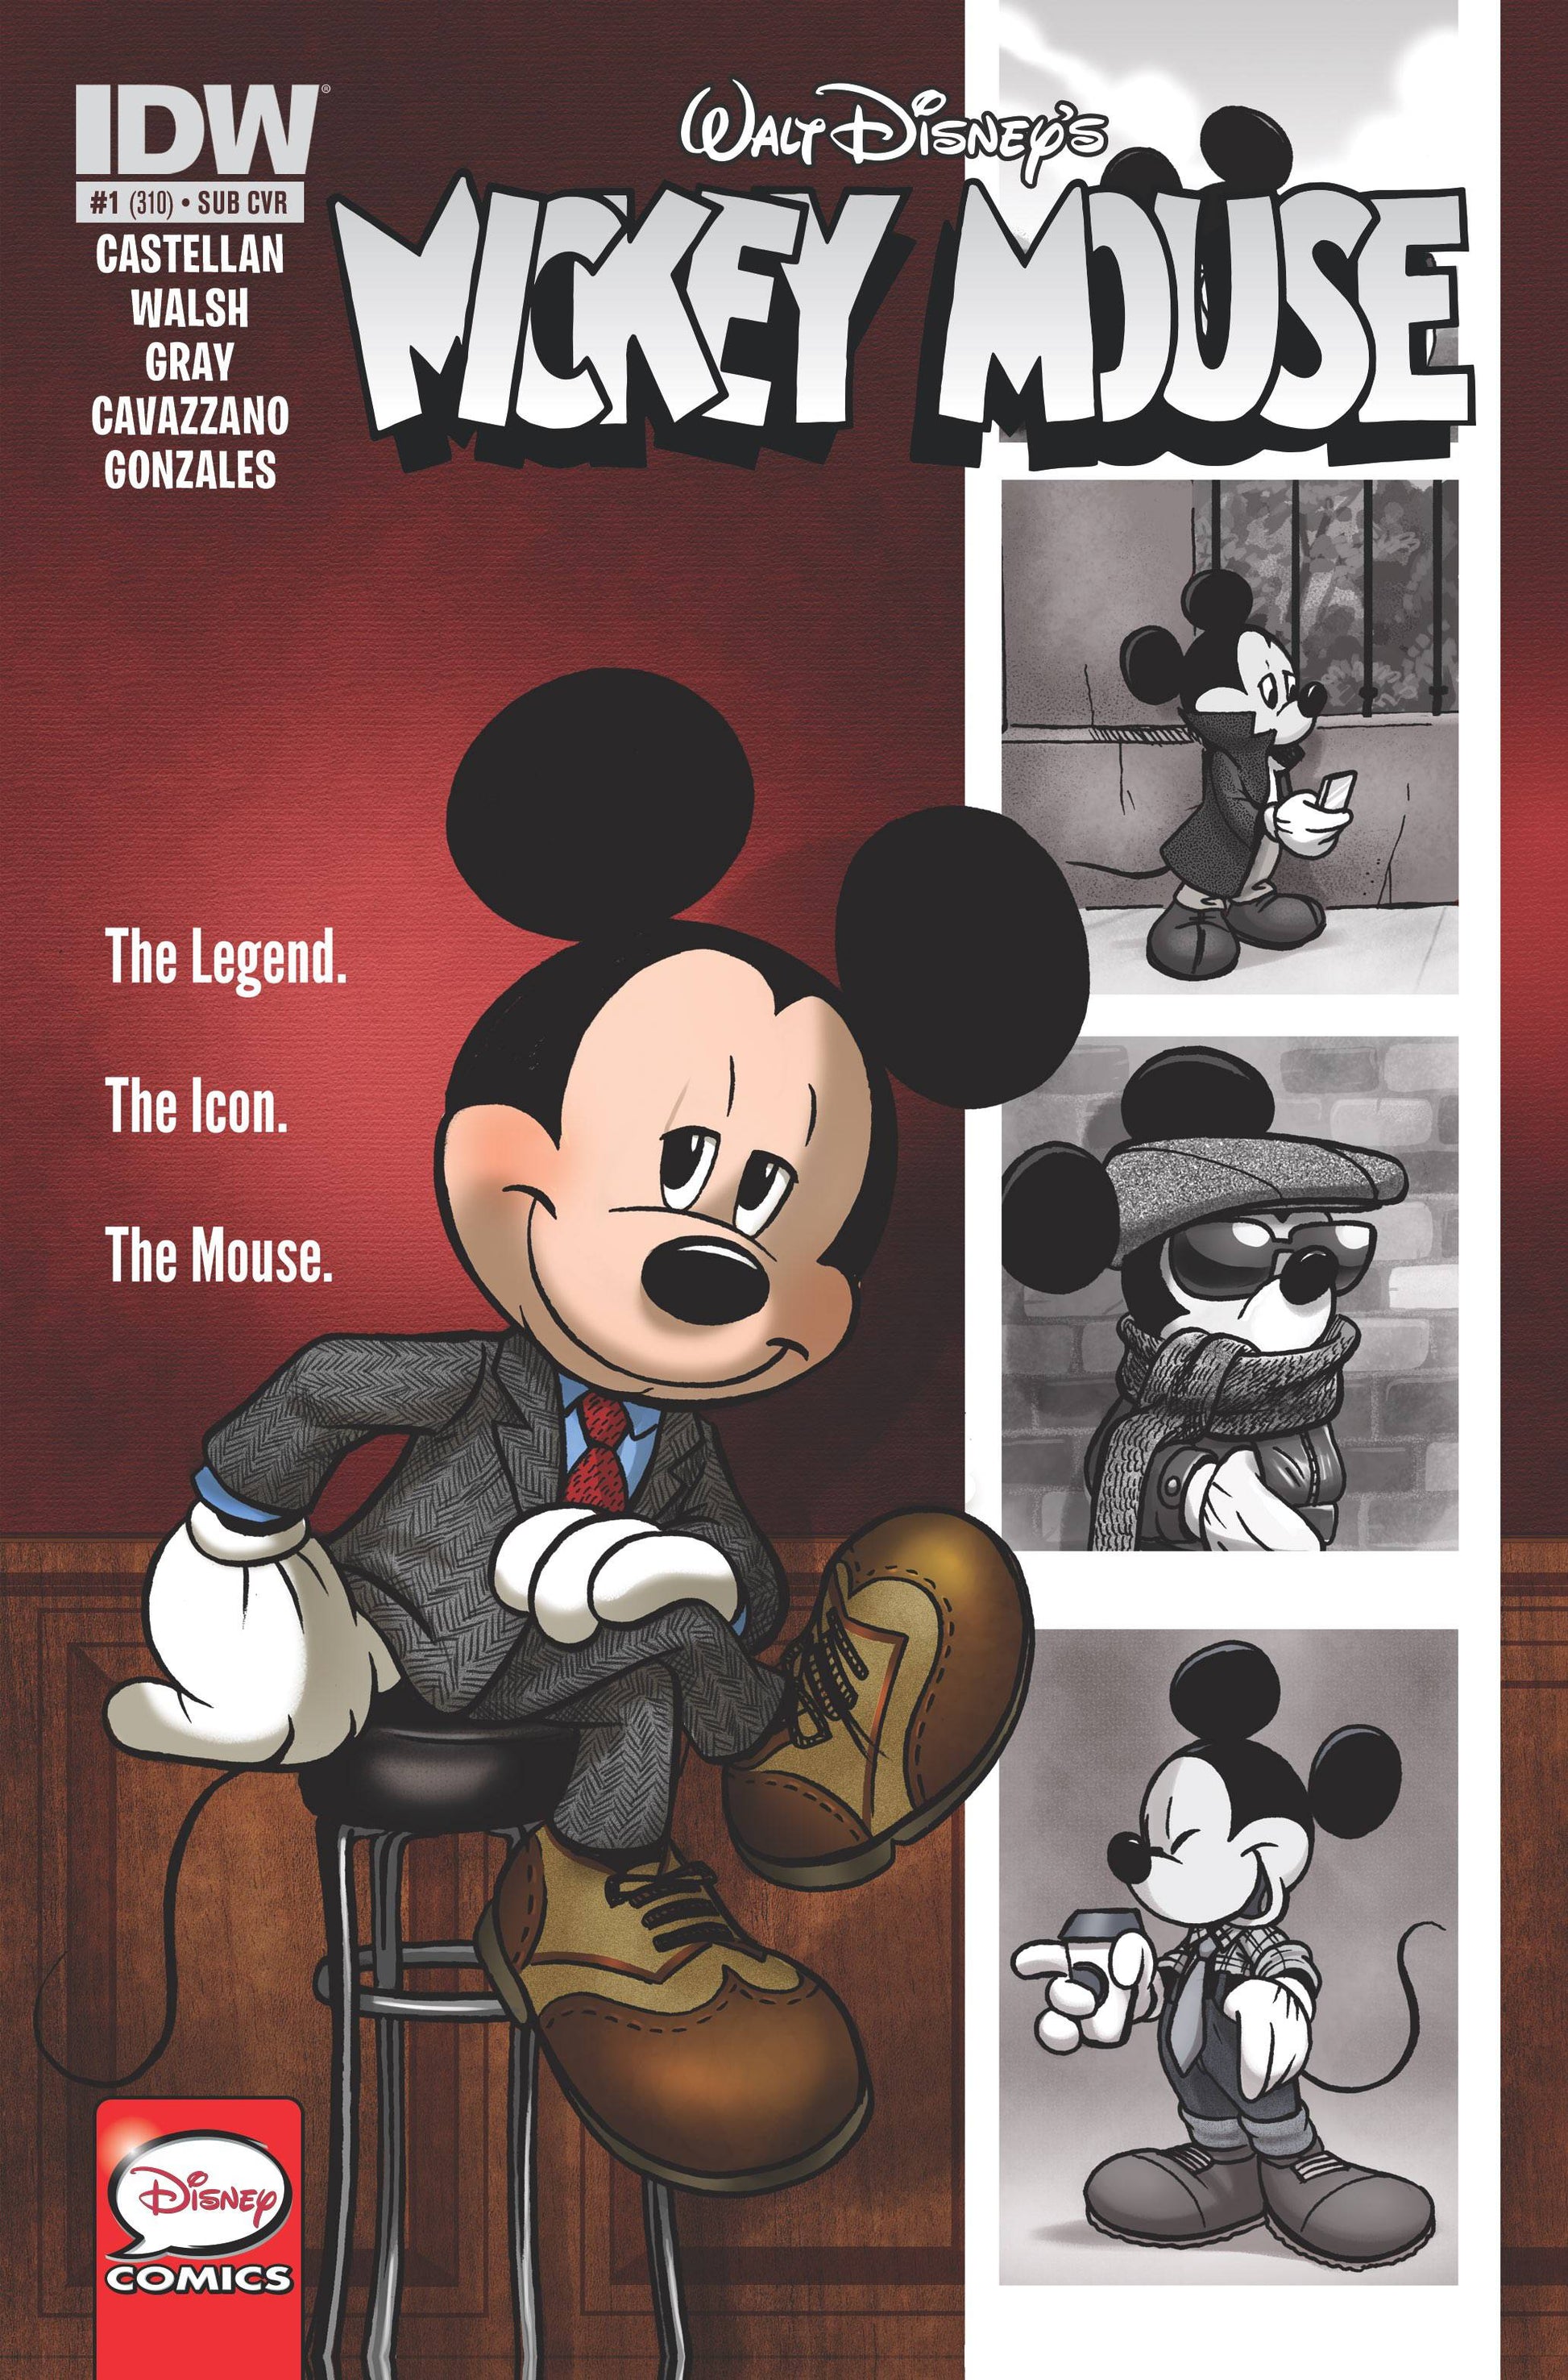 MICKEY MOUSE #1 SUBSCRIPTION VARIANT 2015 Disney IDW PUBLISHING   